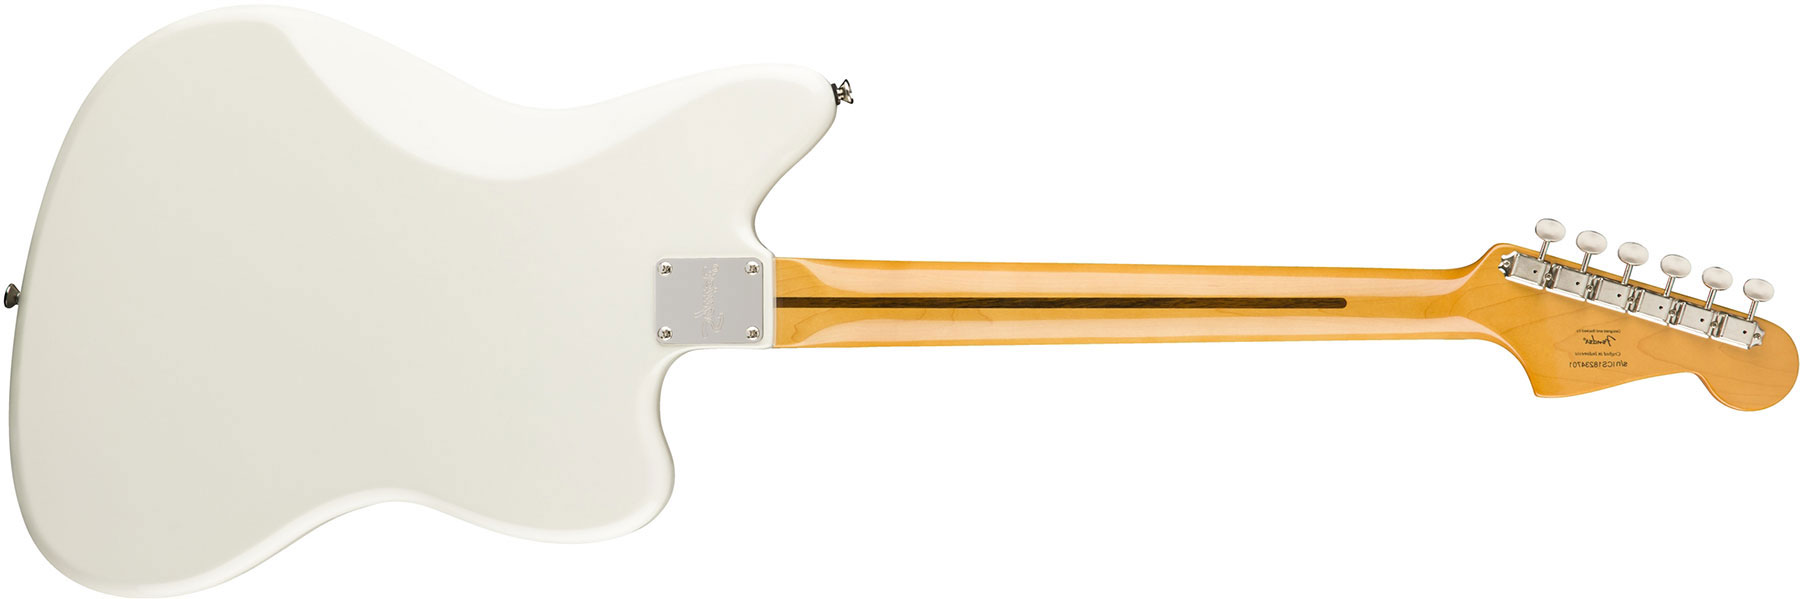 Squier Jazzmaster Classic Vibe 60s 2019 Lh Gaucher Lau - Olympic White - Left-handed electric guitar - Variation 1